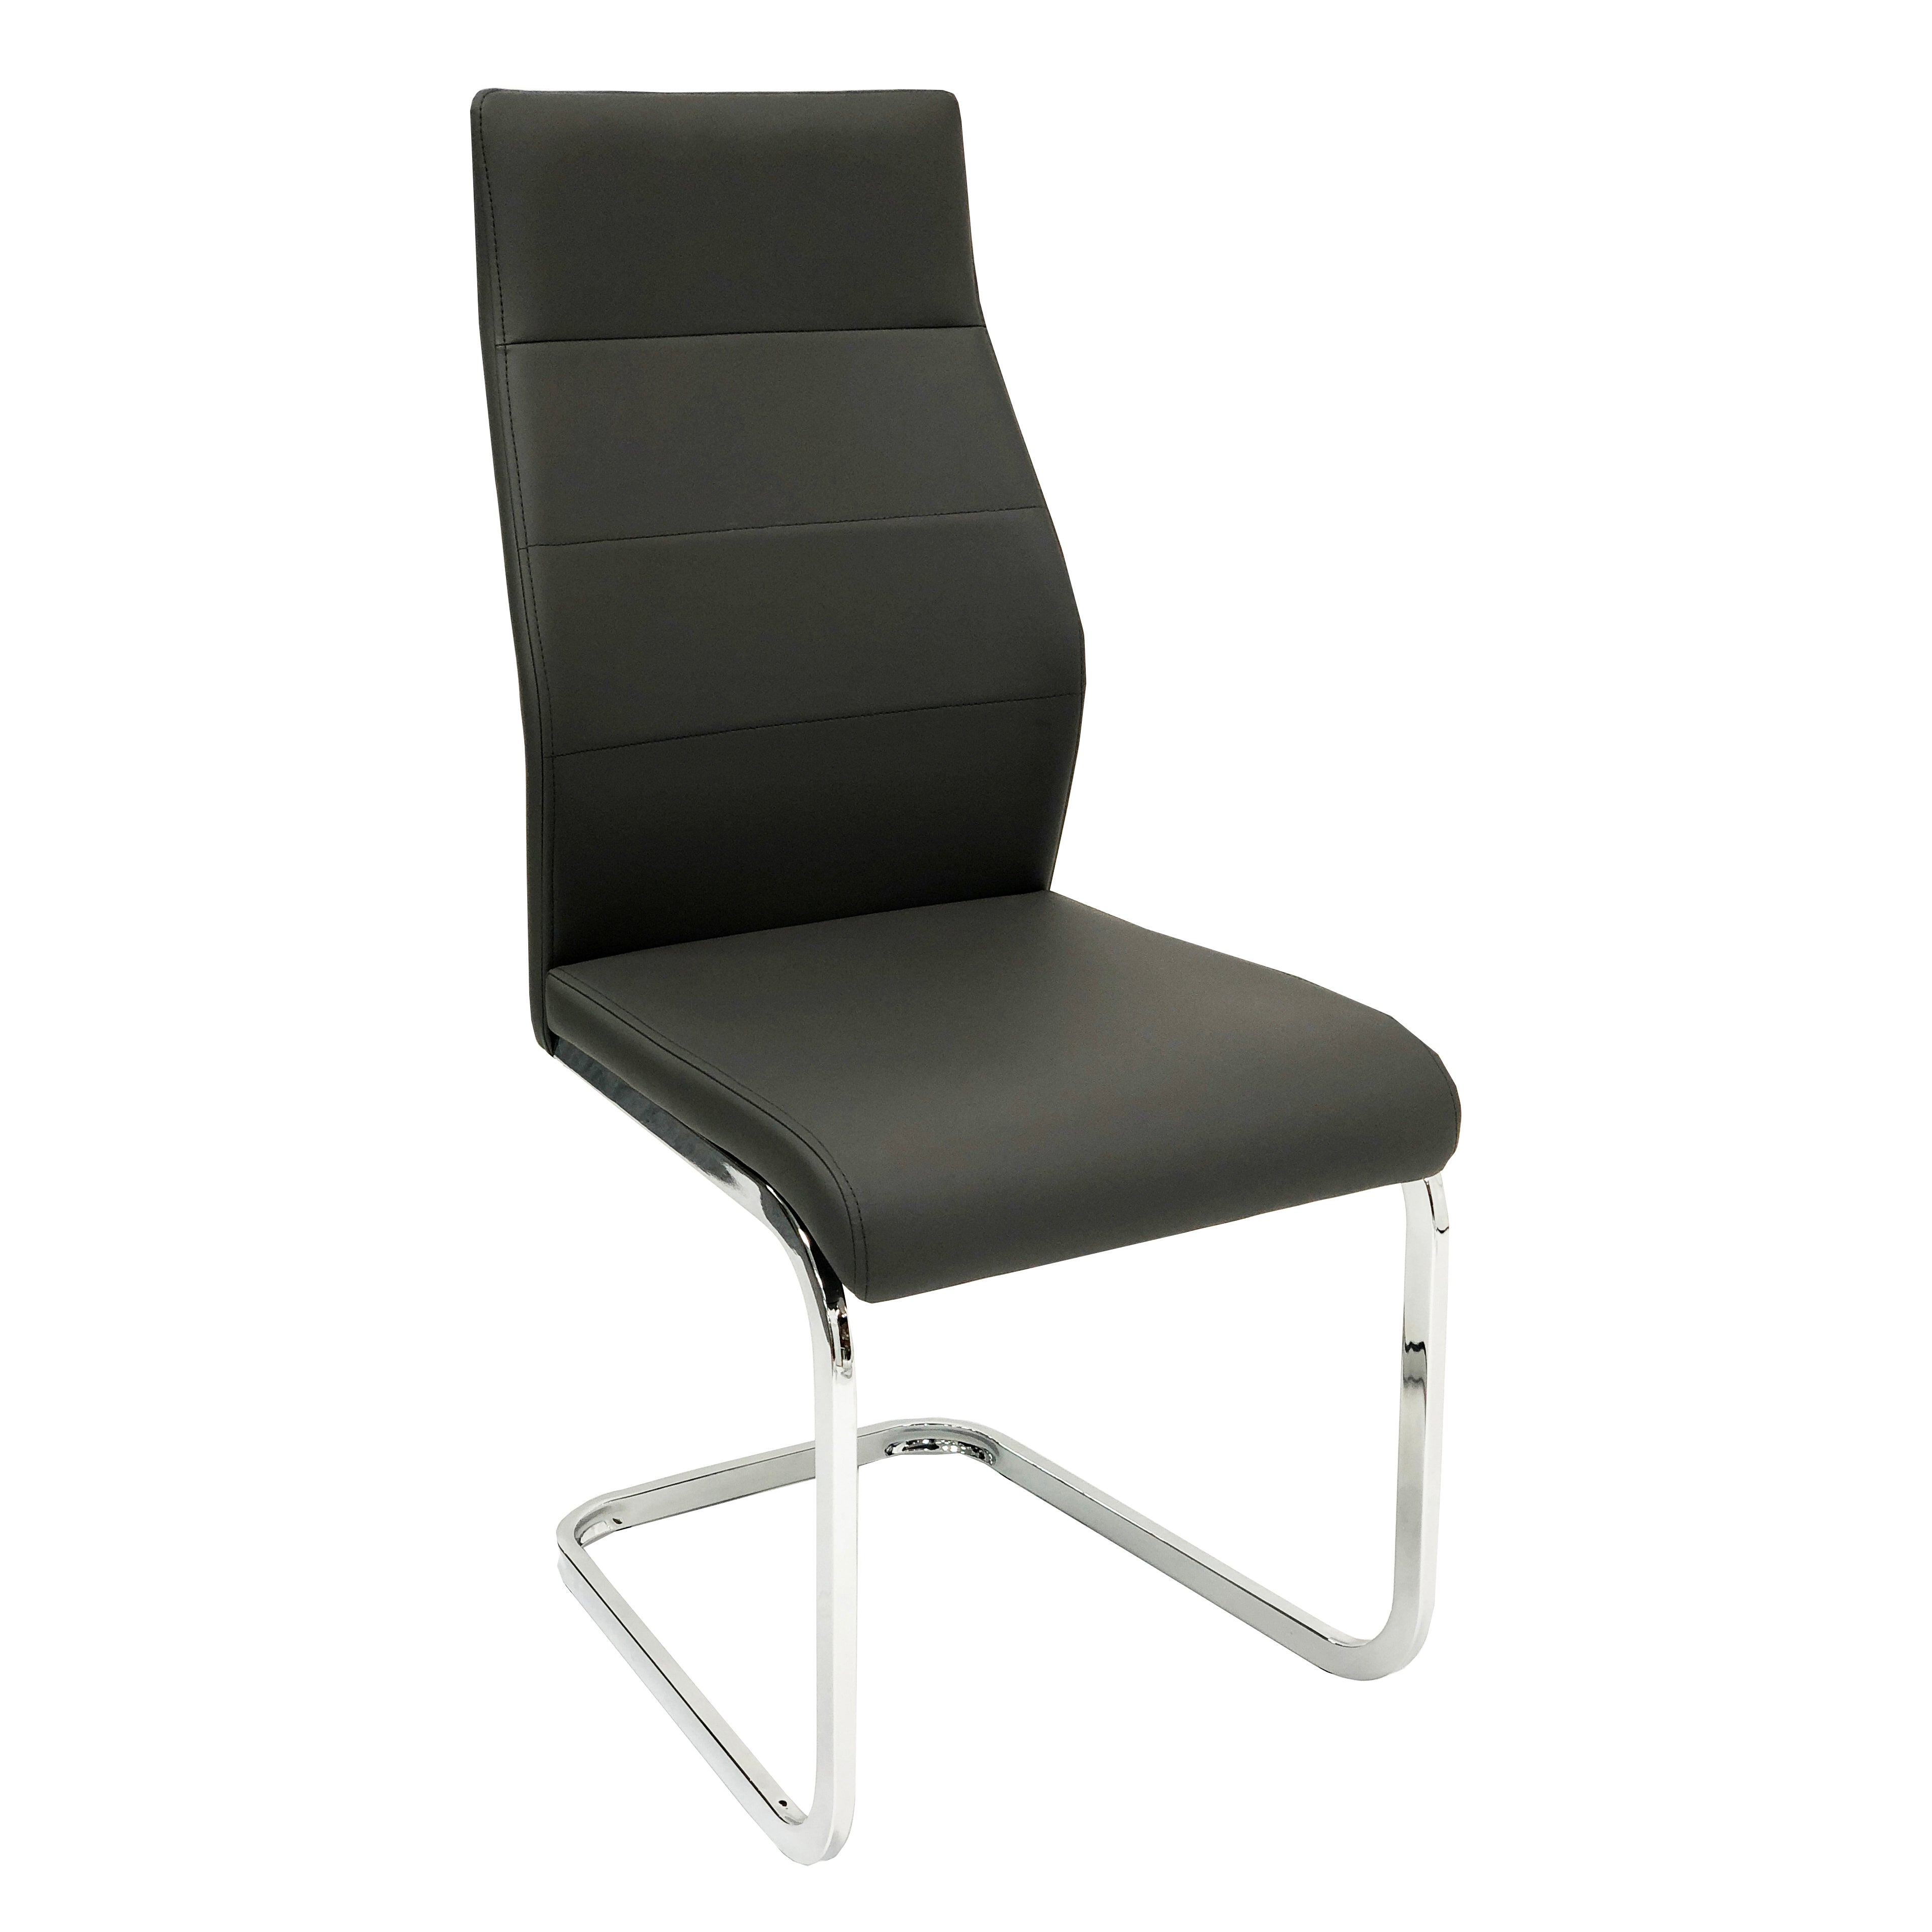 Georgiana Chairs for Dining and Offices